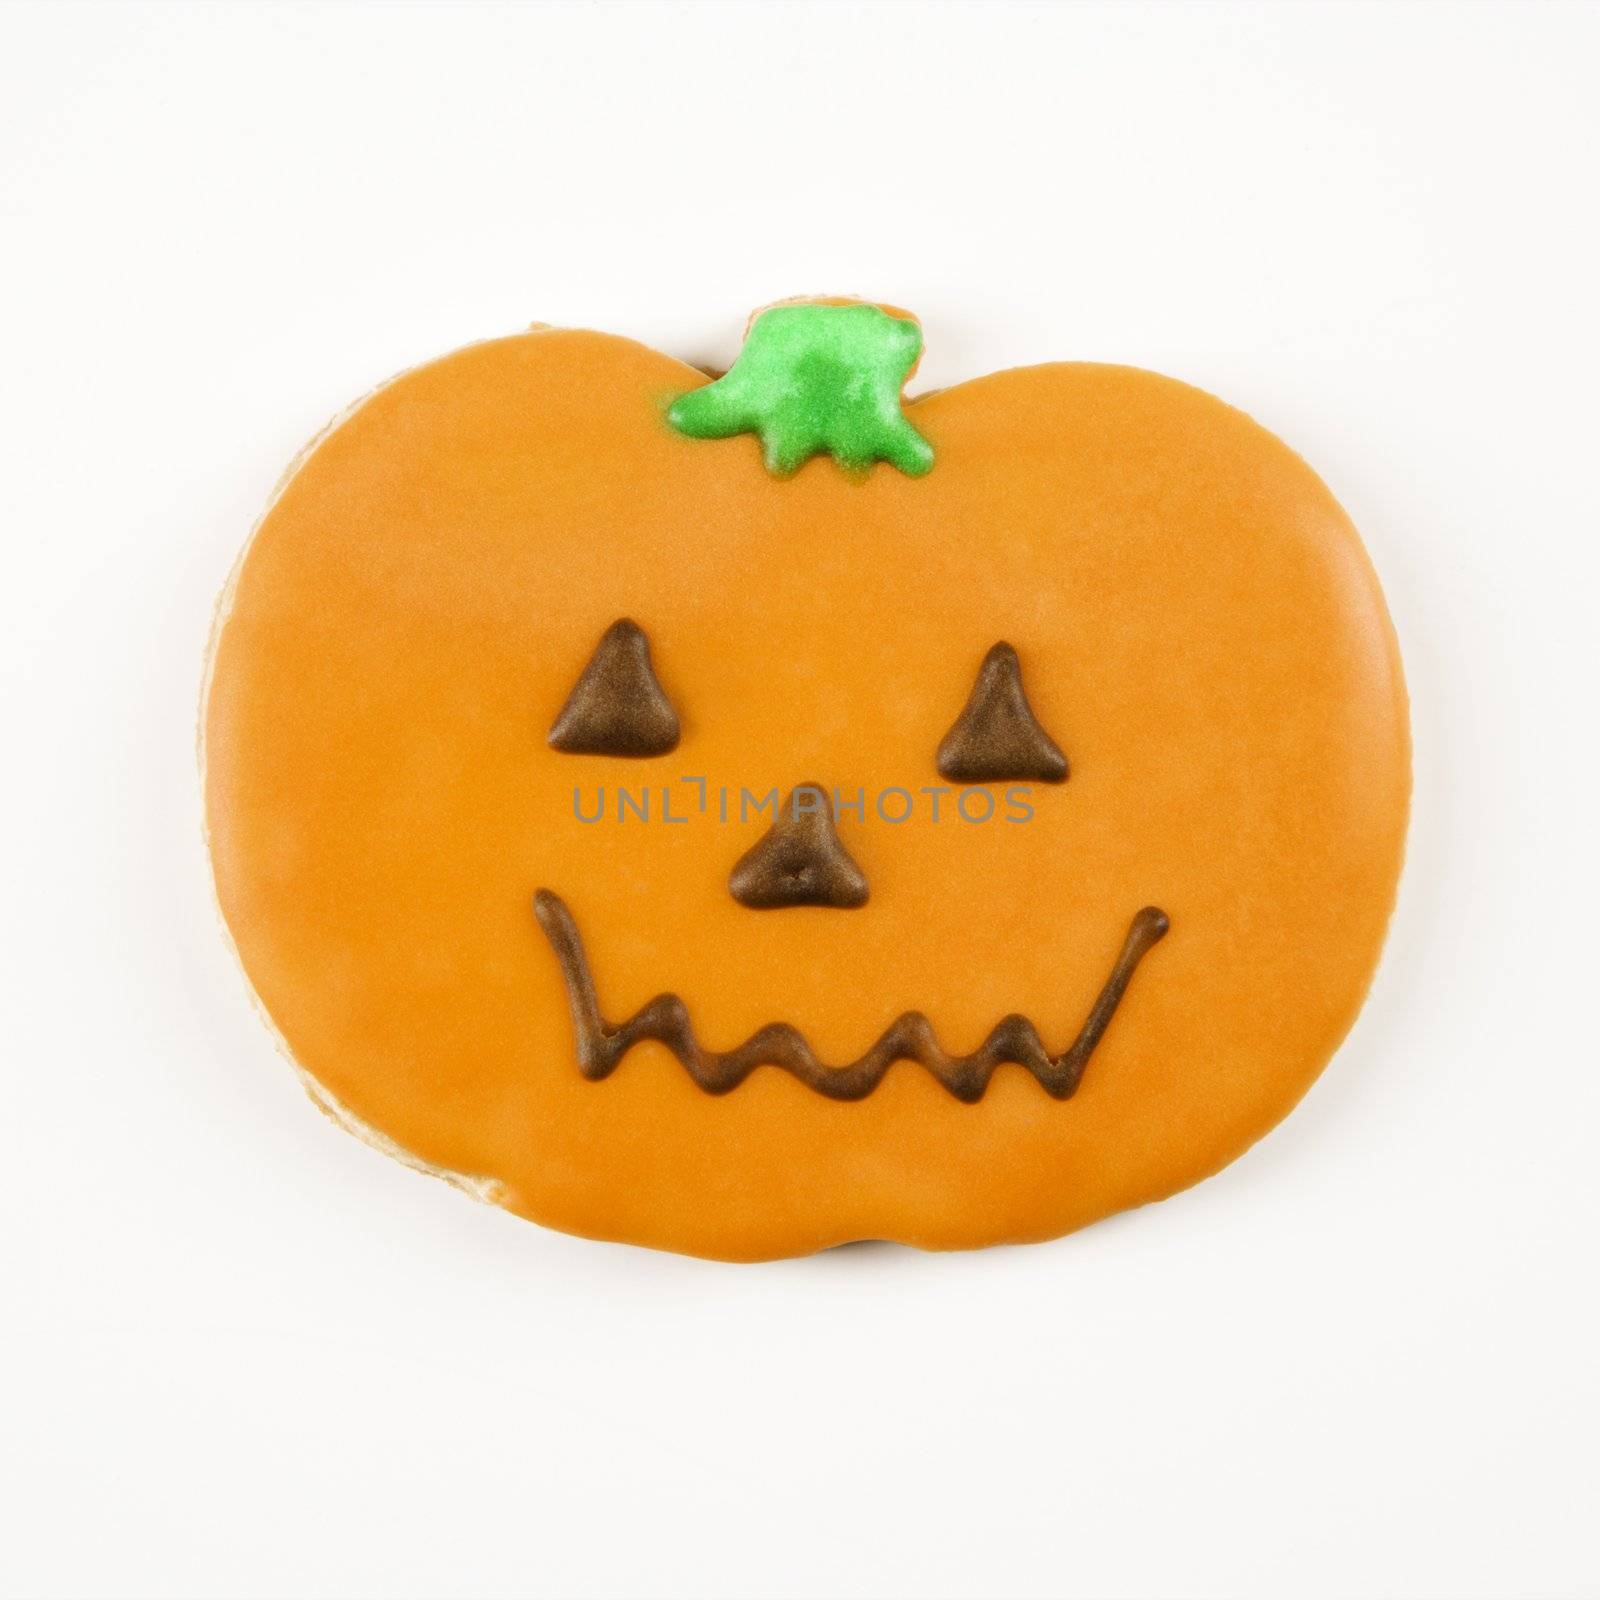 Sugar cookie in shape of jack o lantern with decorative icing.